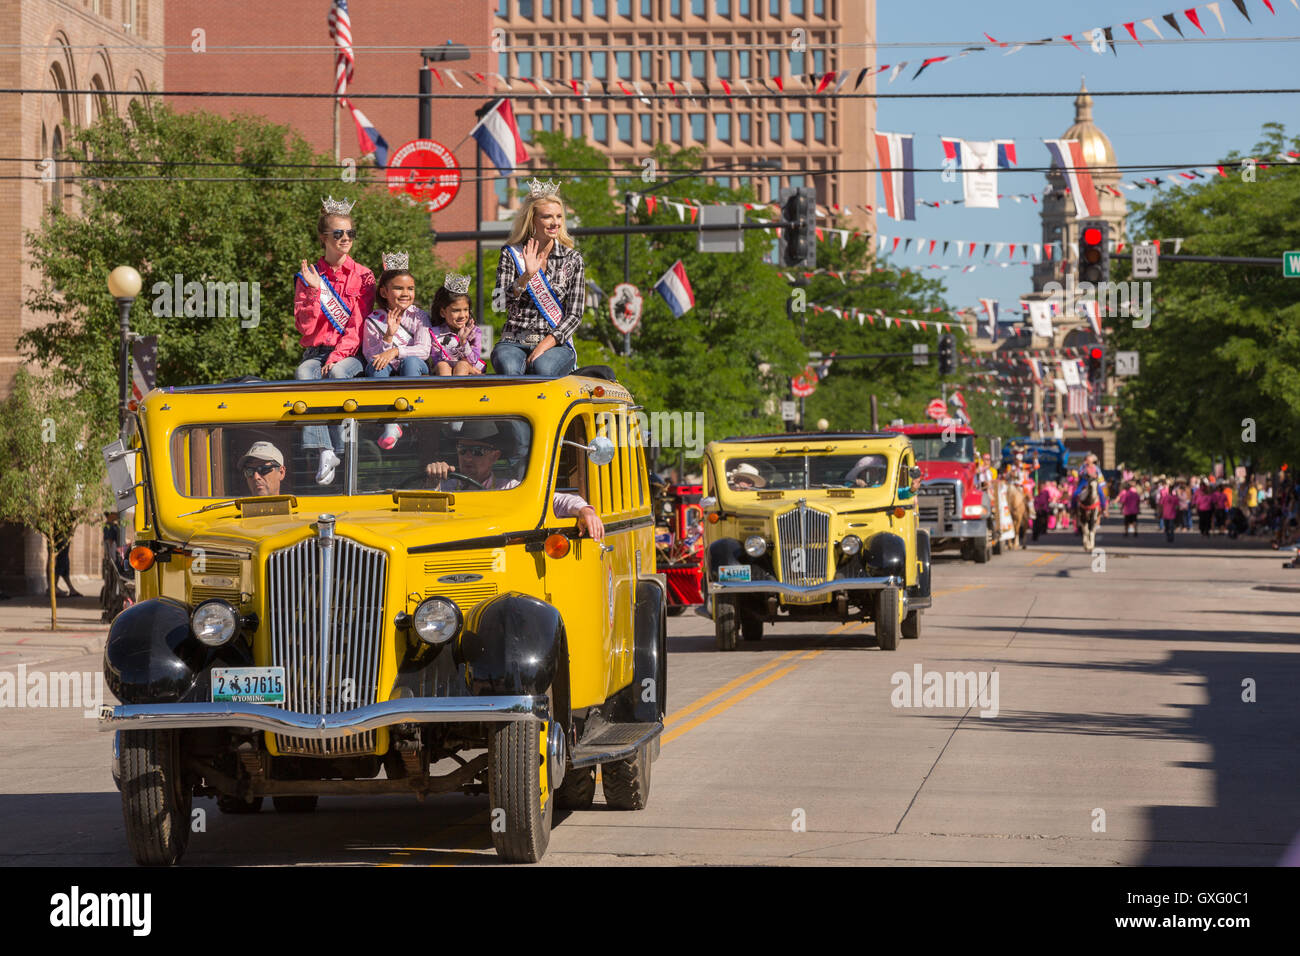 Beauty Queens wave from old buses during the Cheyenne Frontier Days parade past the state capital building July 23, 2015 in Cheyenne, Wyoming. Frontier Days celebrates the cowboy traditions of the west with a rodeo, parade and fair. Stock Photo